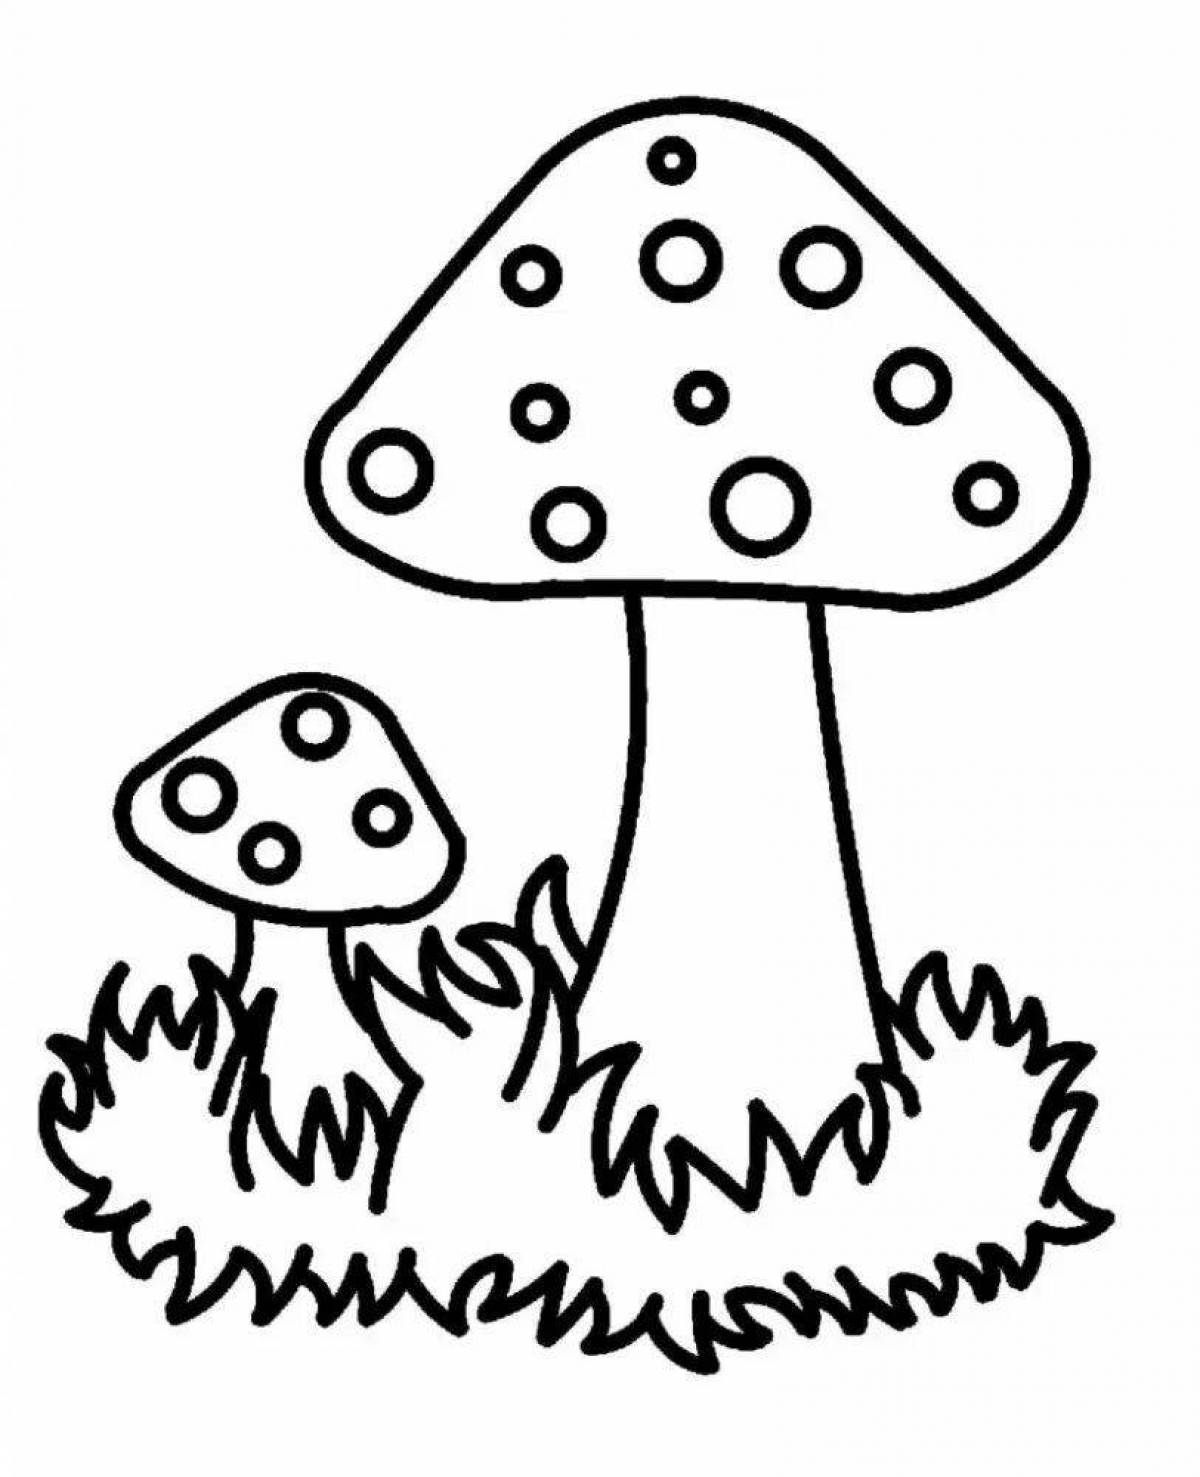 Bright toadstool coloring page